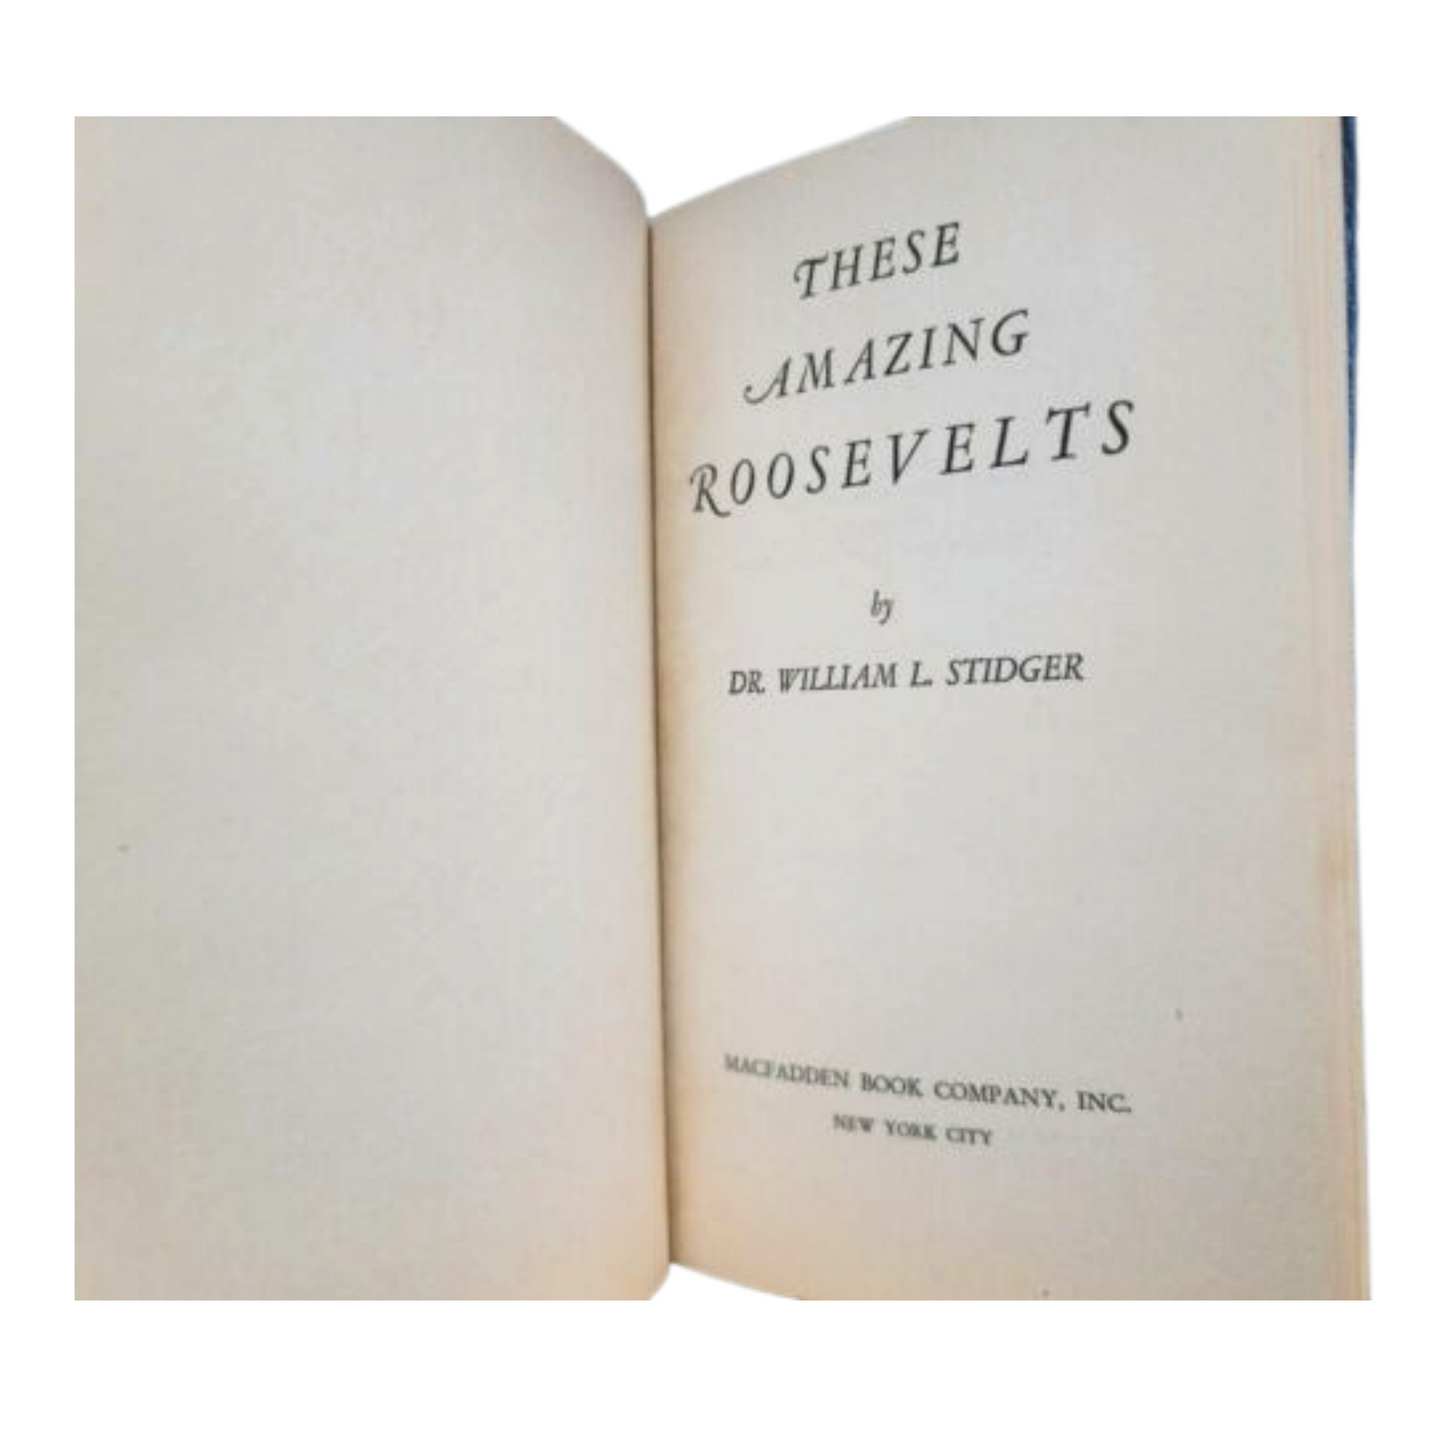 These Amazing Roosevelts by Dr. William L. Stidger - 1938